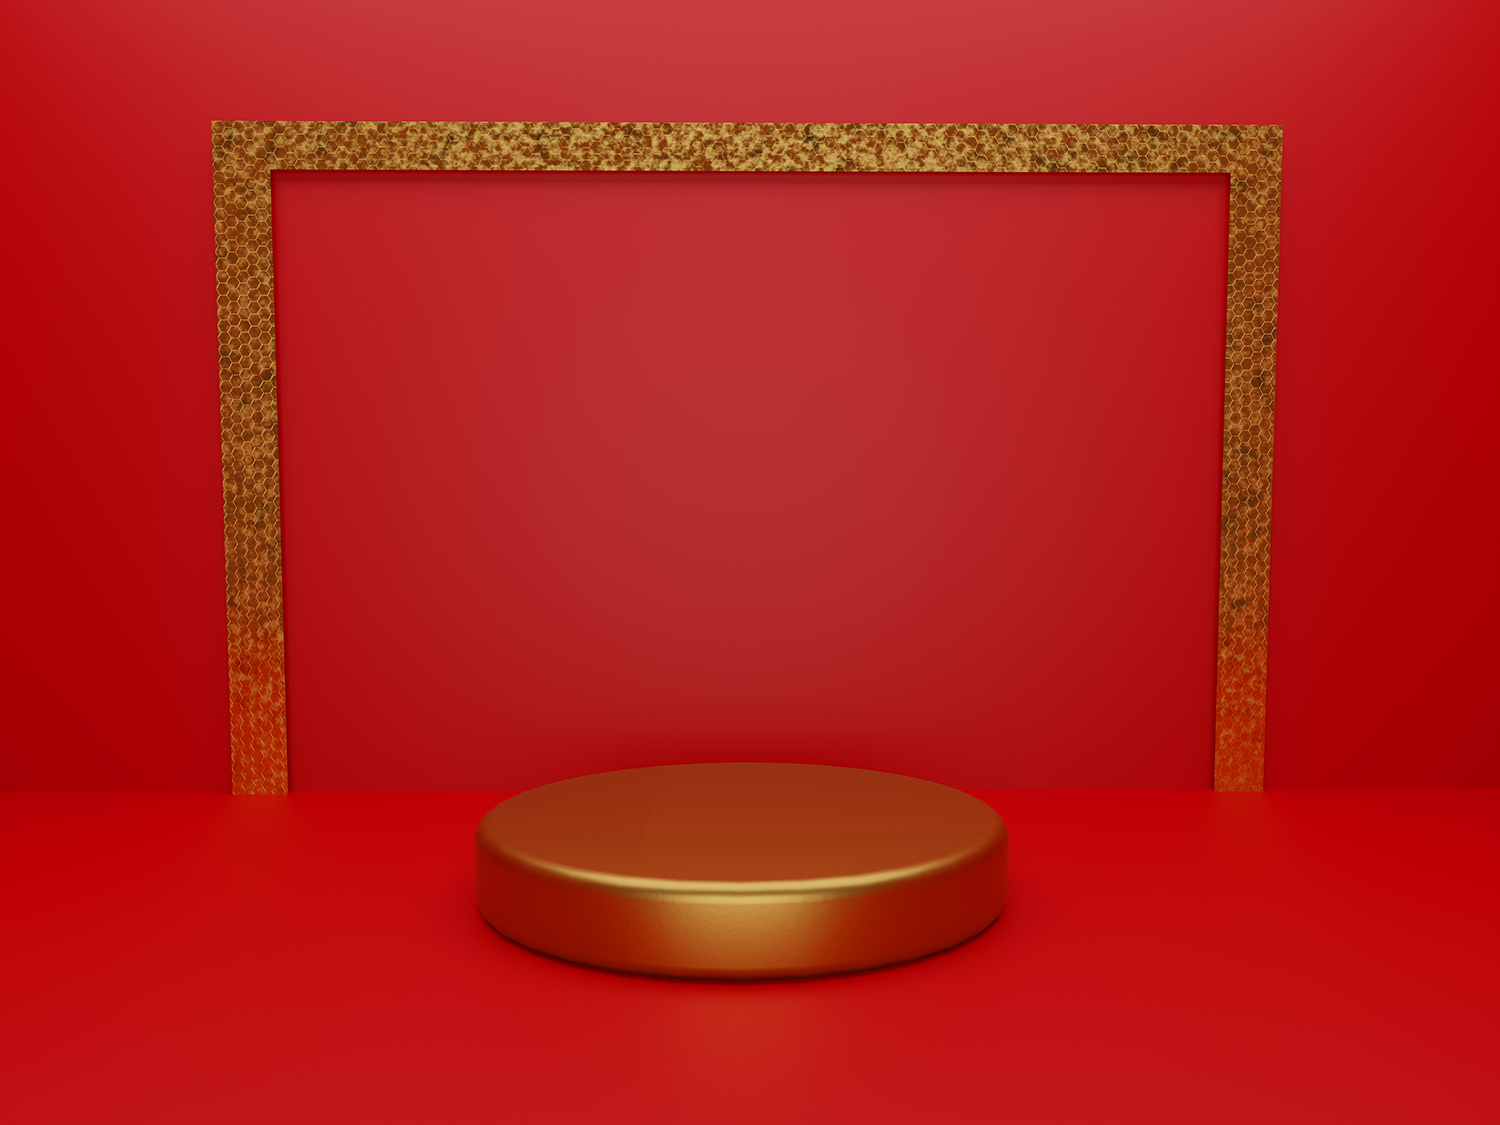 14 Product Display Podium Backgrounds, golden podium on red background with golden rectangular.